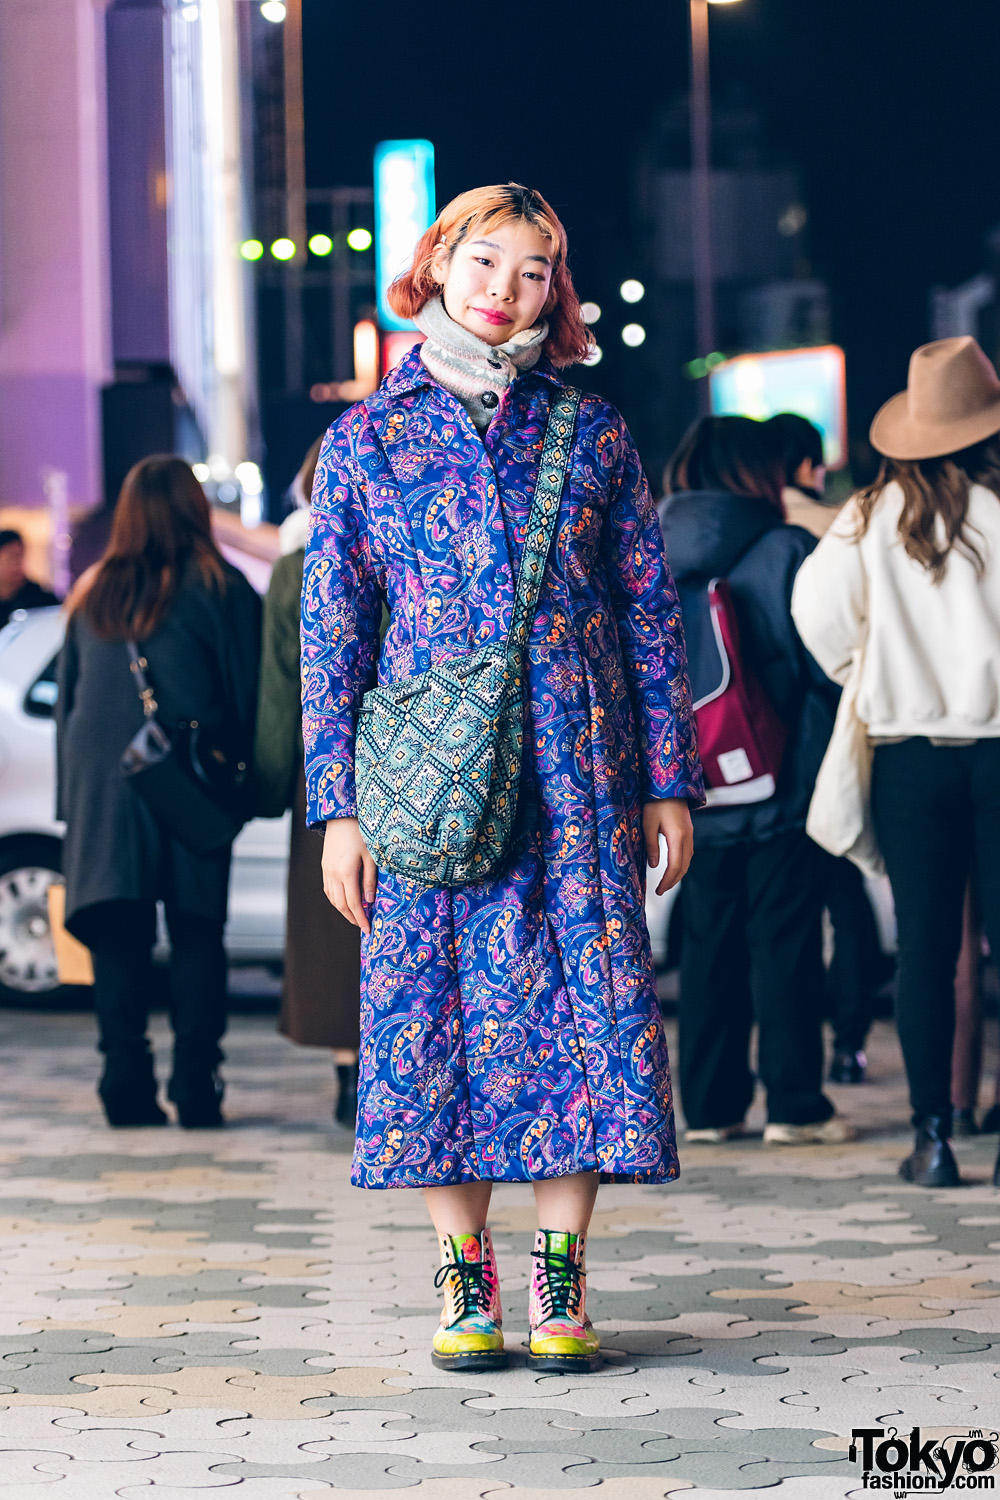 Tokyo Streetwear Style w/ Curly Ombre Bob, Paisley Print Quilted Coat, Polka Dot Shirt, GU Bag, & Hand-Painted Dr. Martens Boots